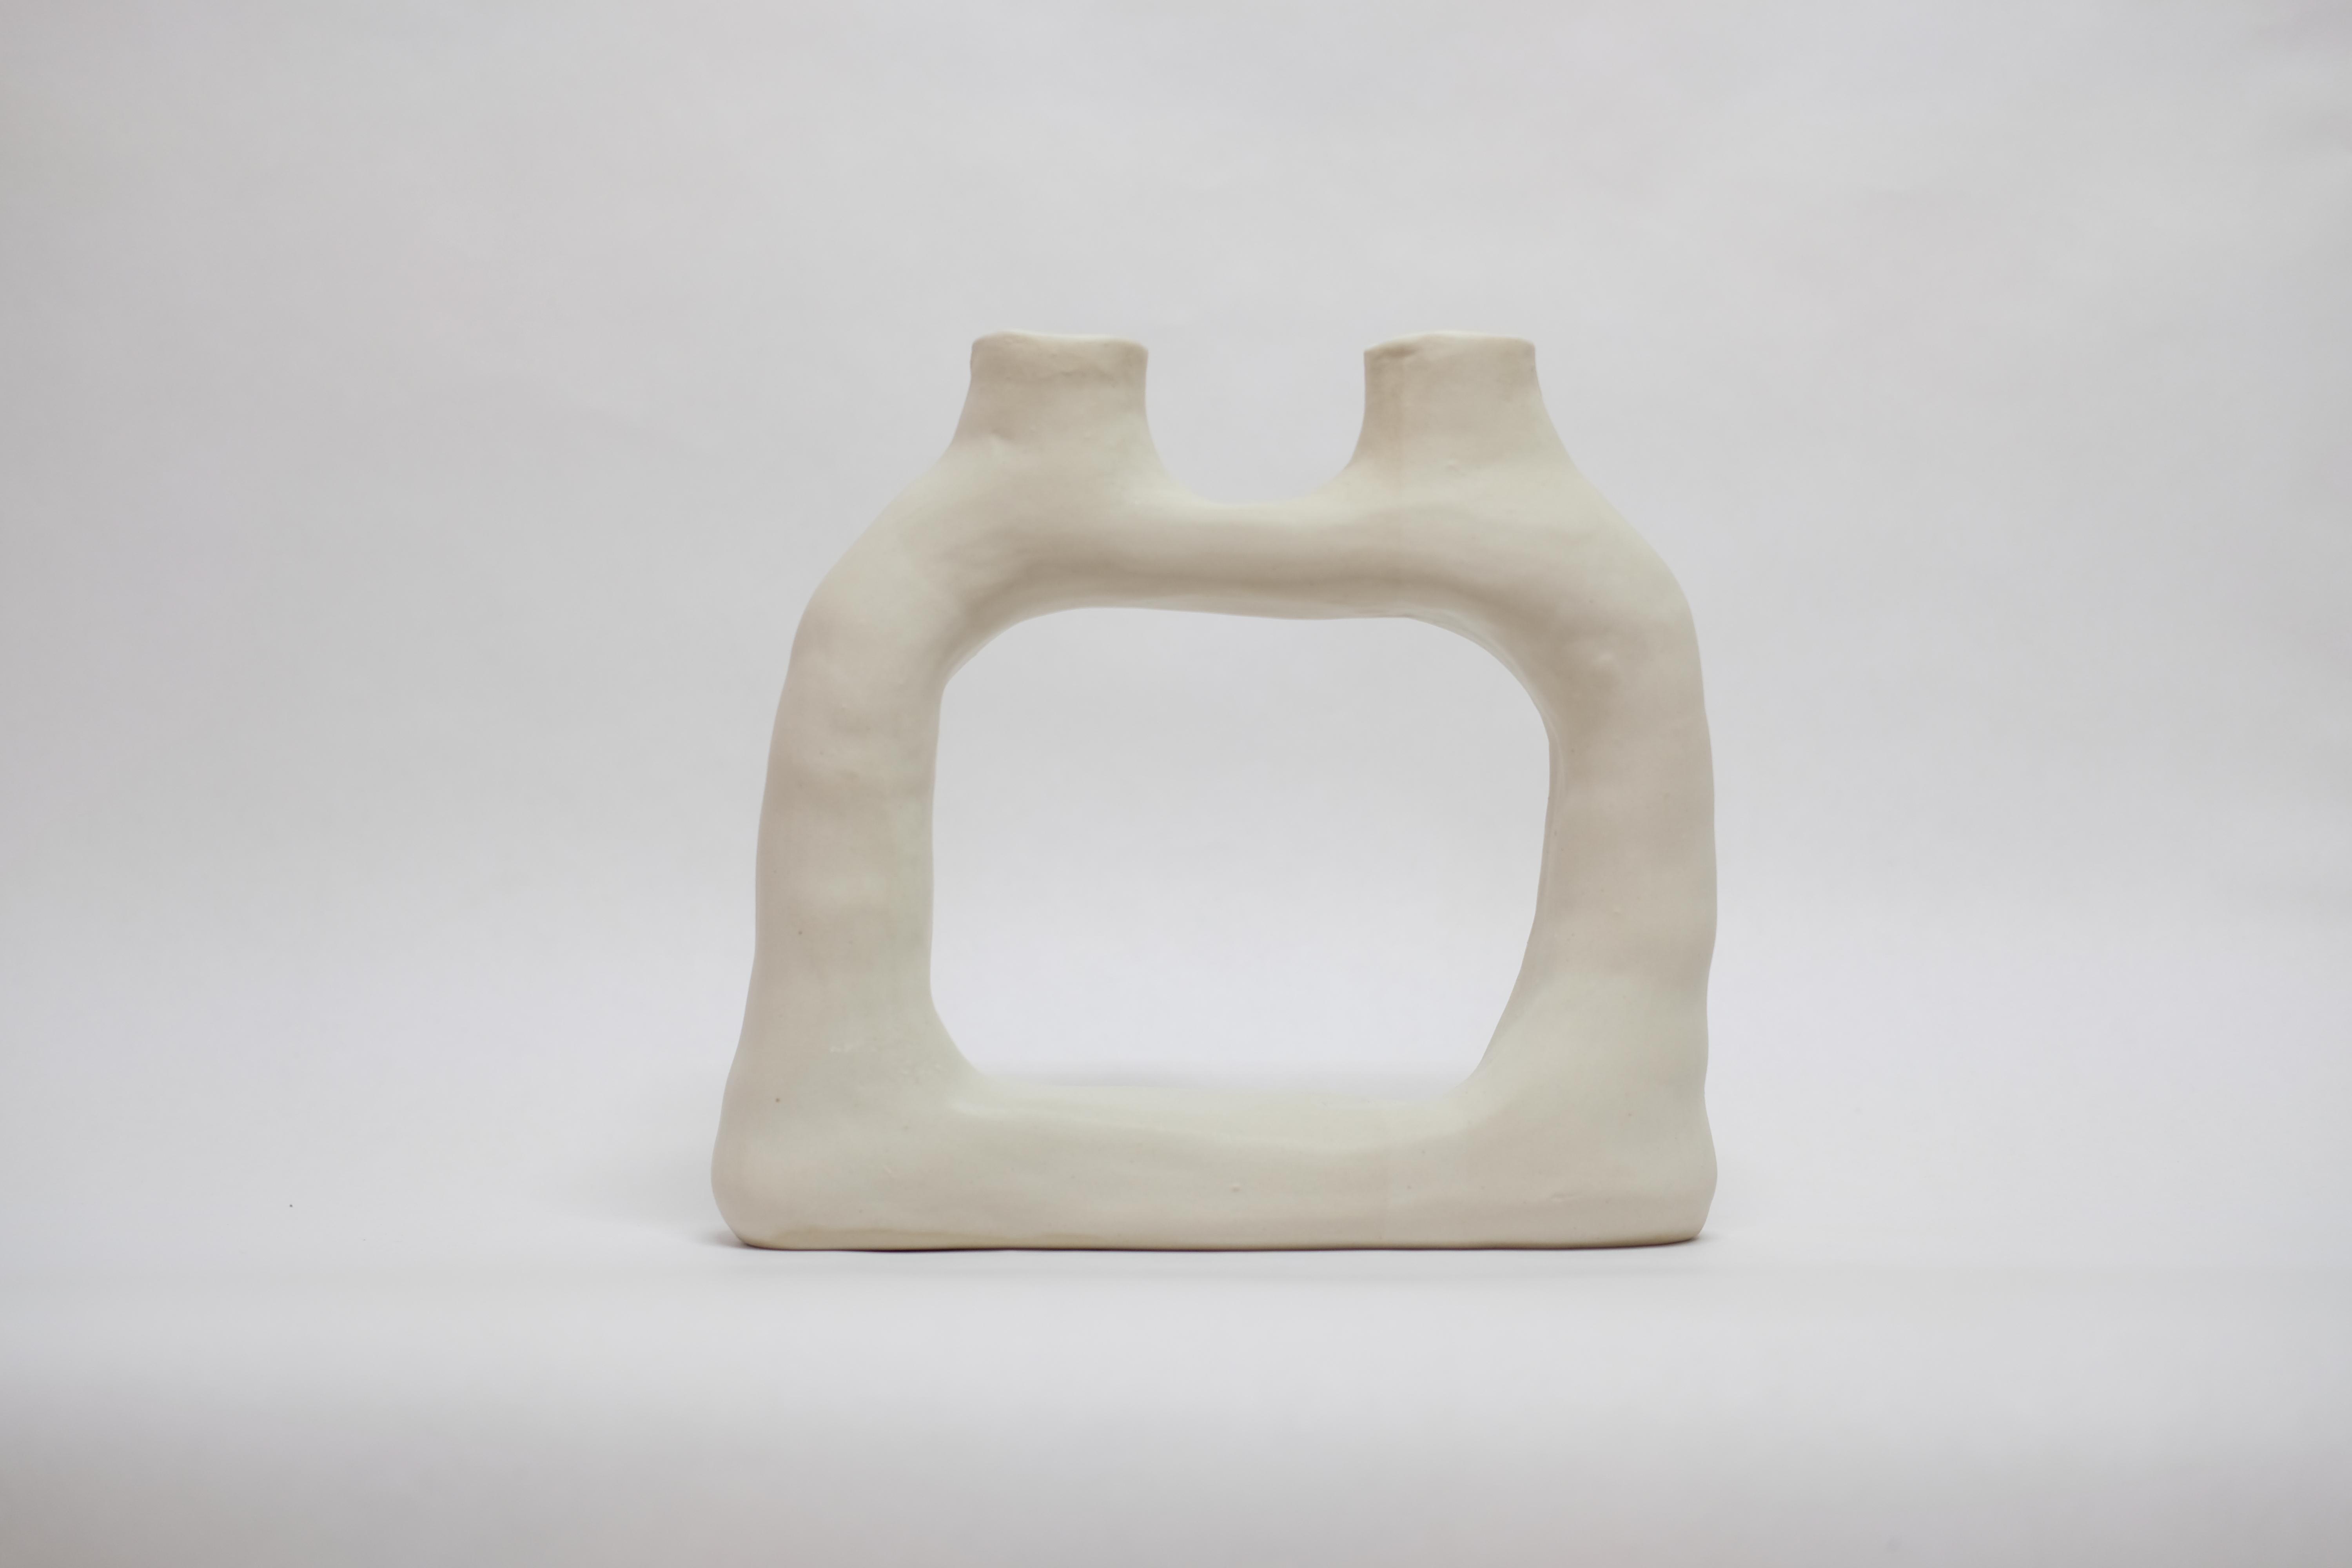 Dual No.2 stoneware vase by Camila Apaez
One of a kind
Materials: Stoneware
Dimensions: 23 x 8 x 19 cm 
Options: White bone, butter milk, charcoal black

This year has been shaped by the topographies of our homes and the uncertainty of our